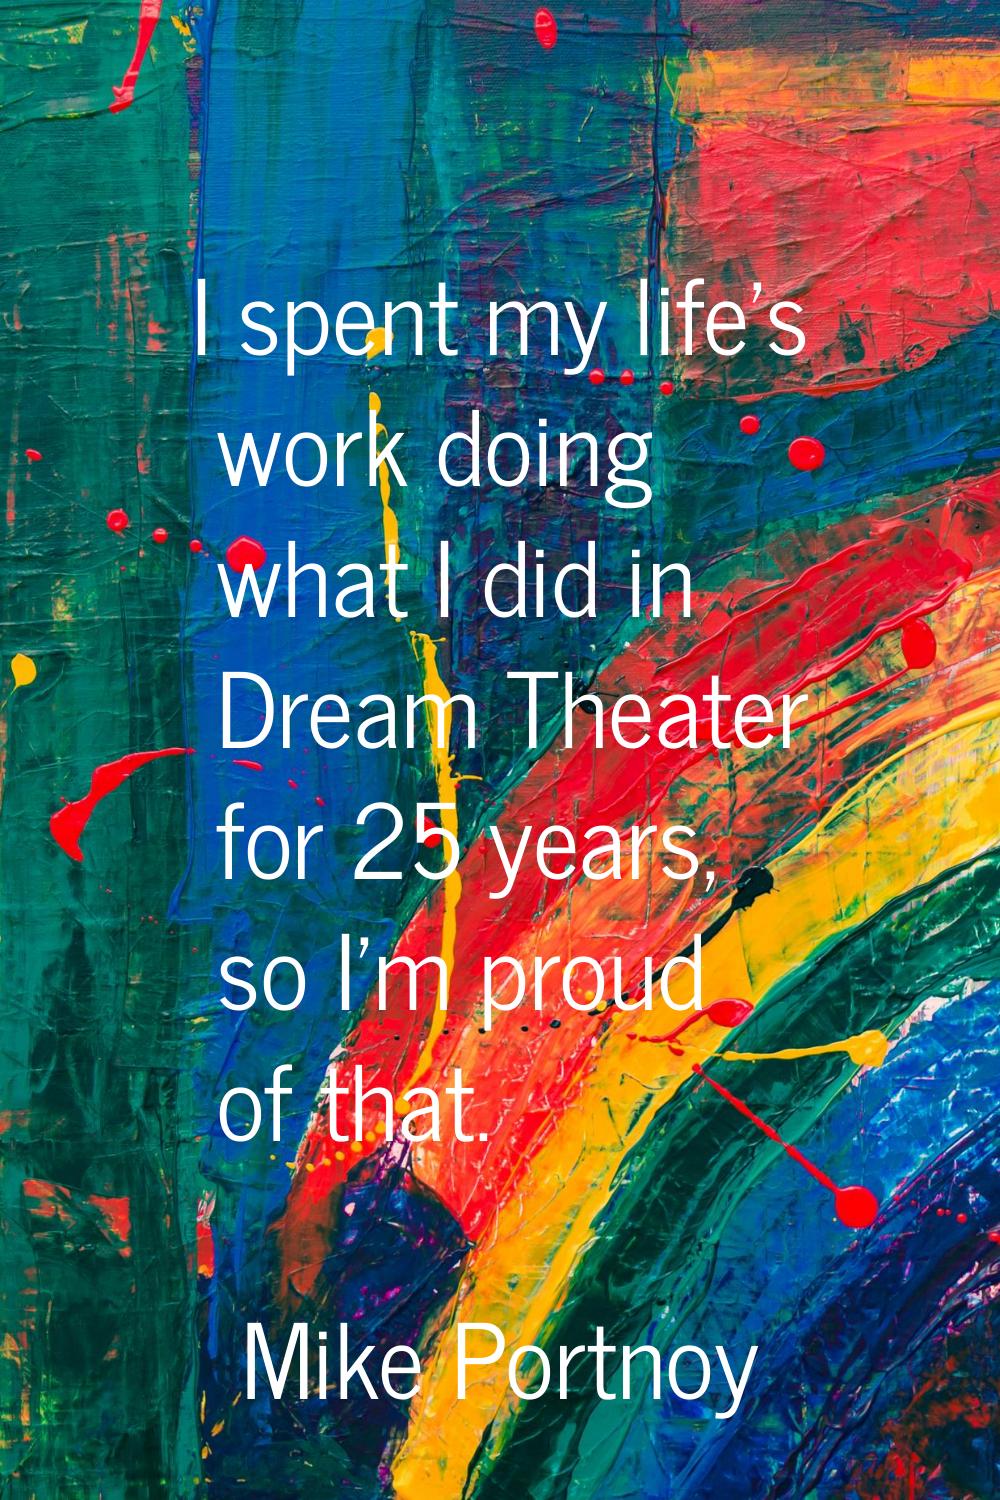 I spent my life's work doing what I did in Dream Theater for 25 years, so I'm proud of that.